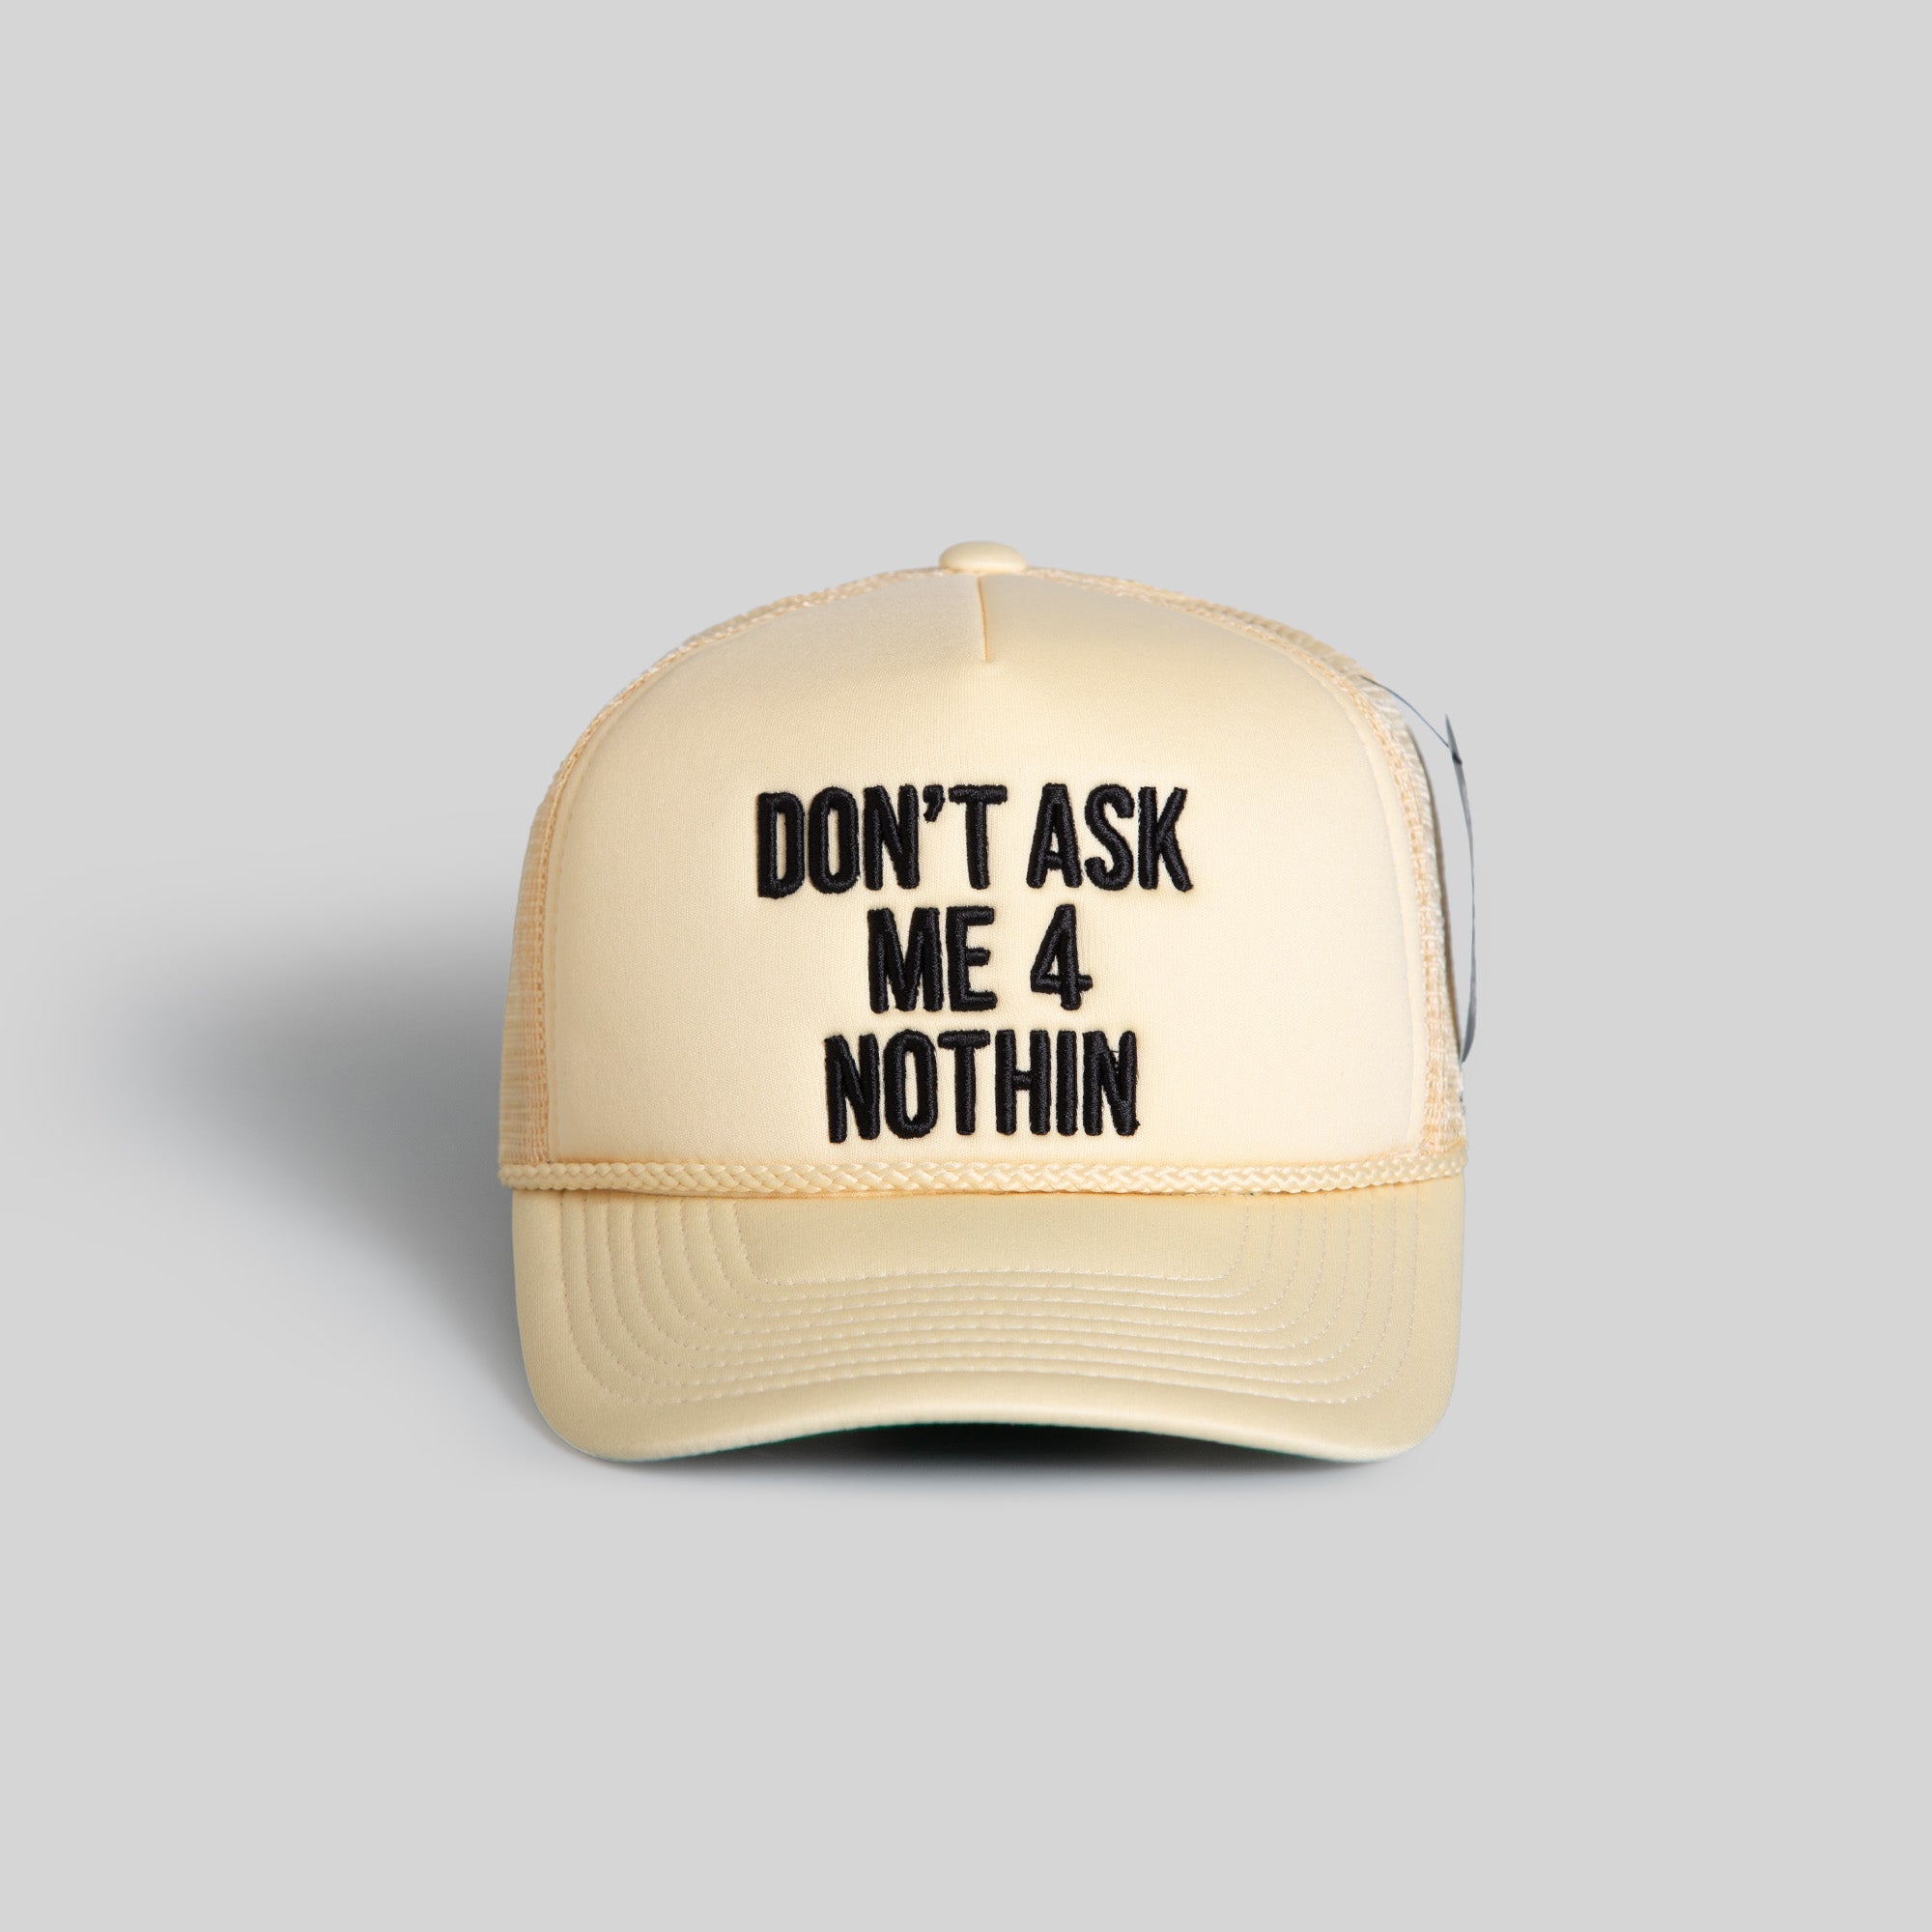 DON'T ASK ME SAND TRUCKER HAT